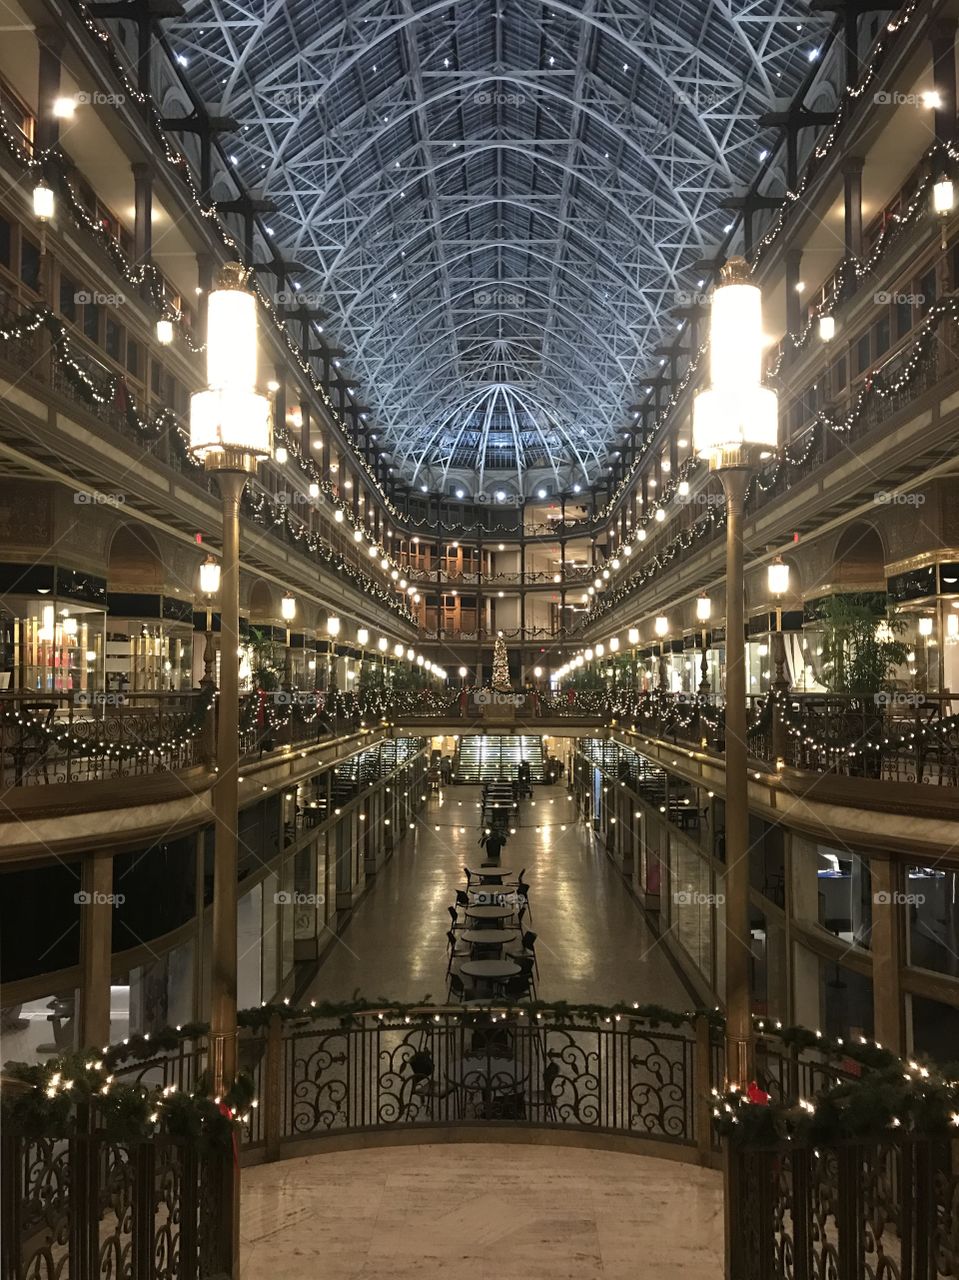 Beautiful architecture in Cleveland, Ohio during the holiday season 